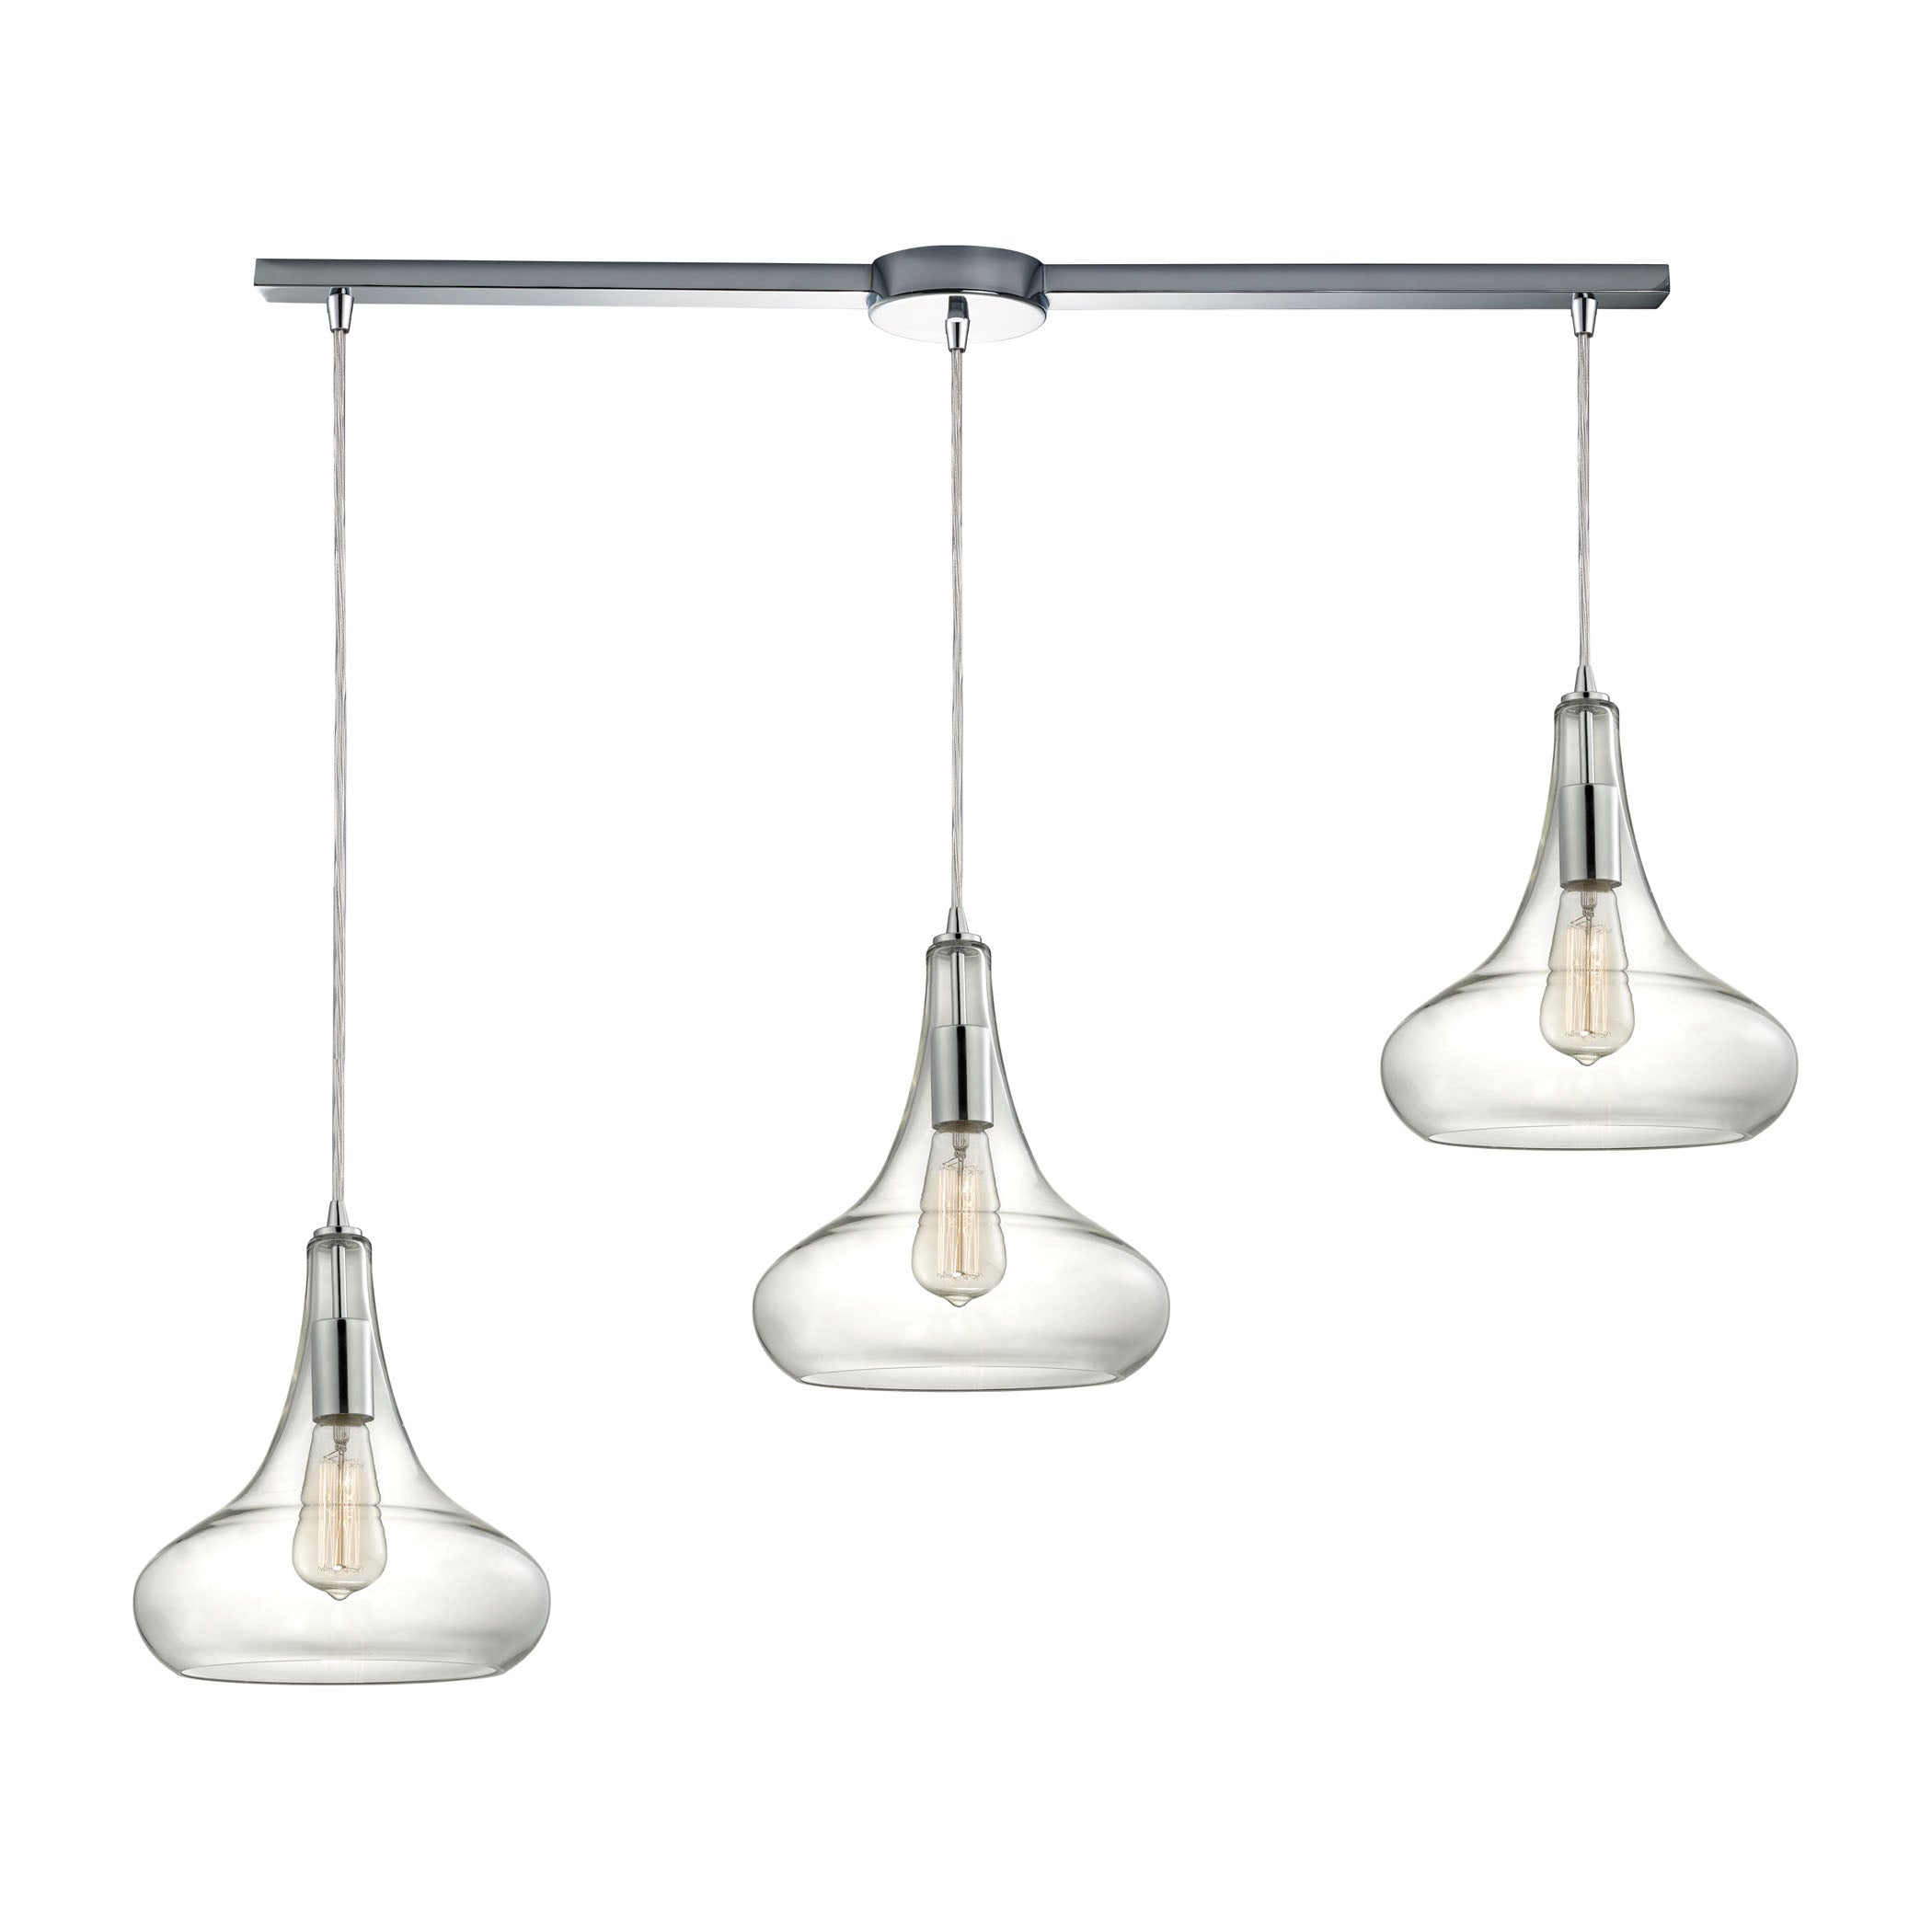 ELK Lighting 10422/3L Orbital 3-Light Linear Pendant Fixture in Polished Chrome with Clear Glass